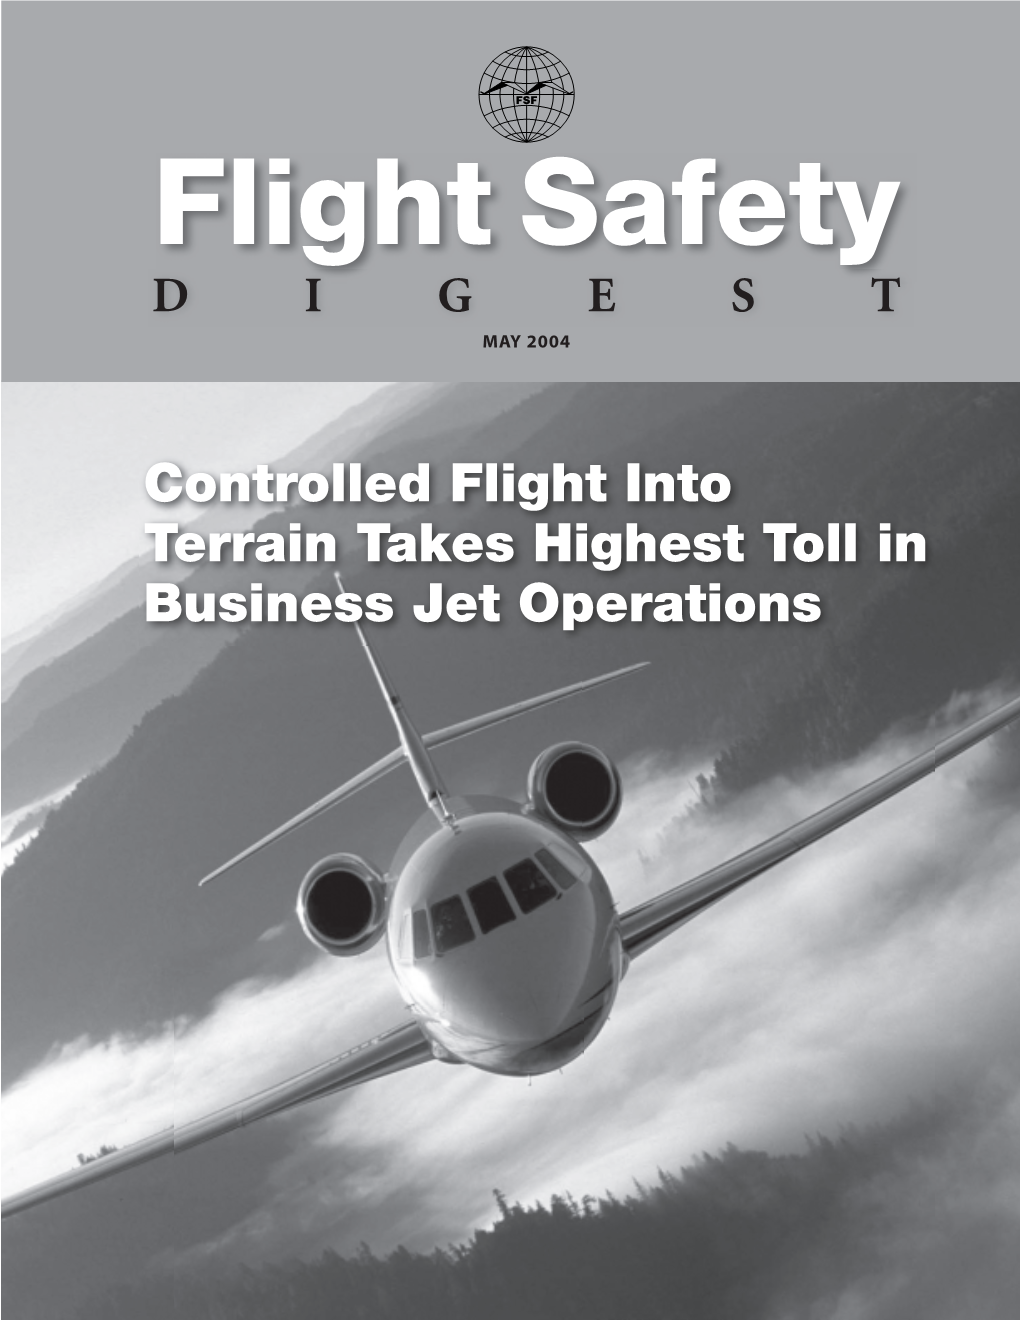 Controlled Flight Into Terrain Takes Highest Toll in Business Jet